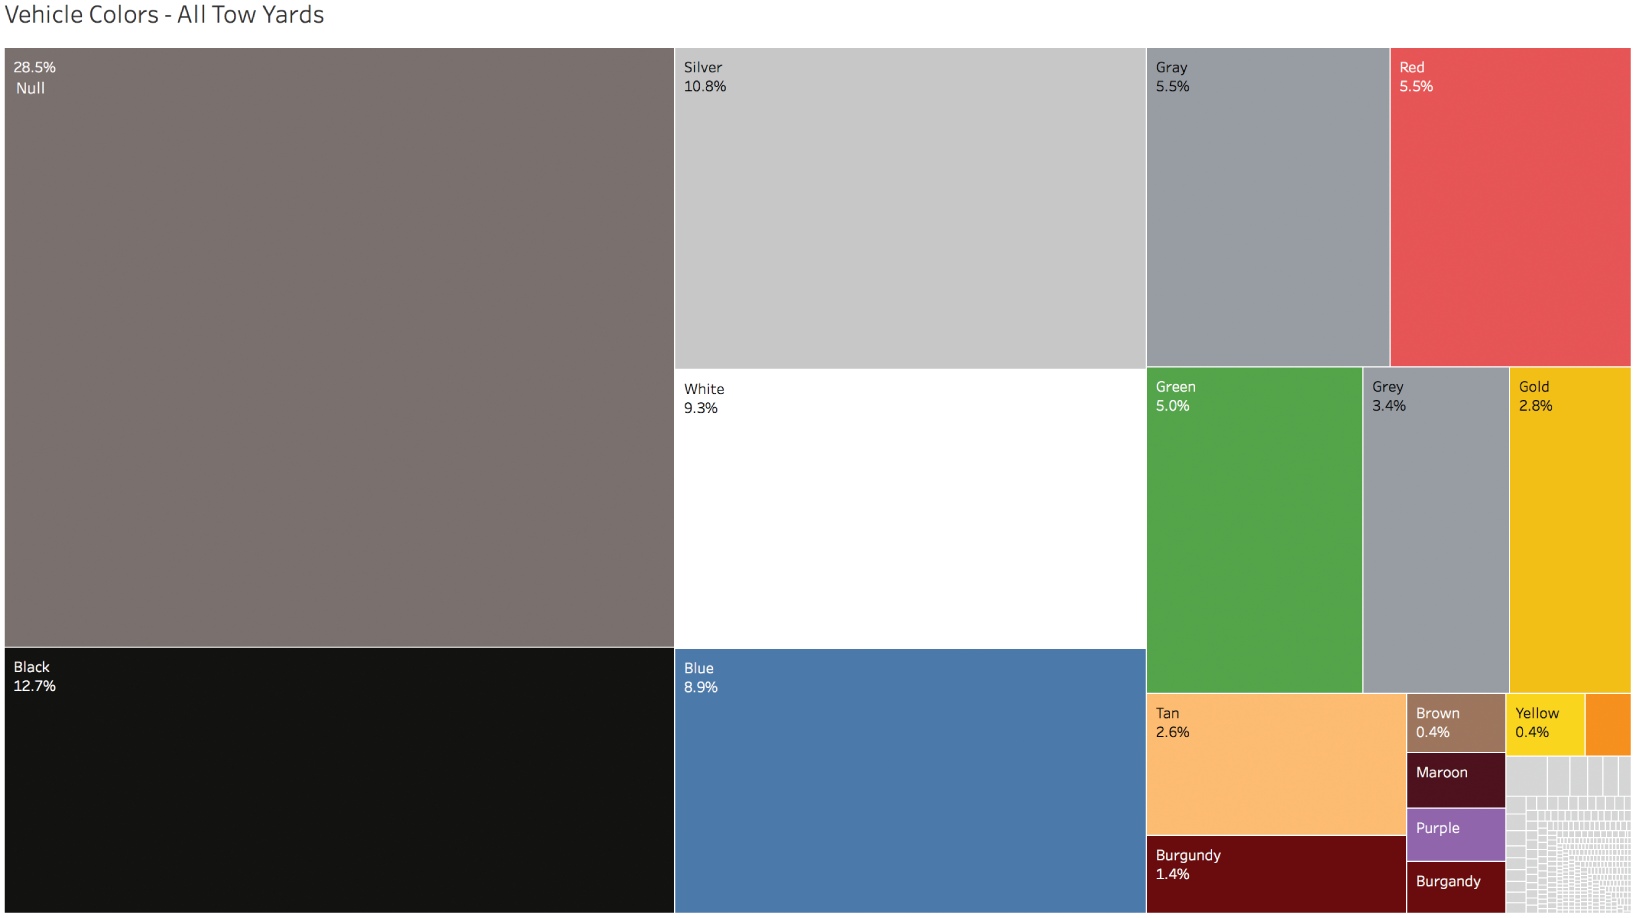 A treemap of vehicle shades based on towing records to the yards.